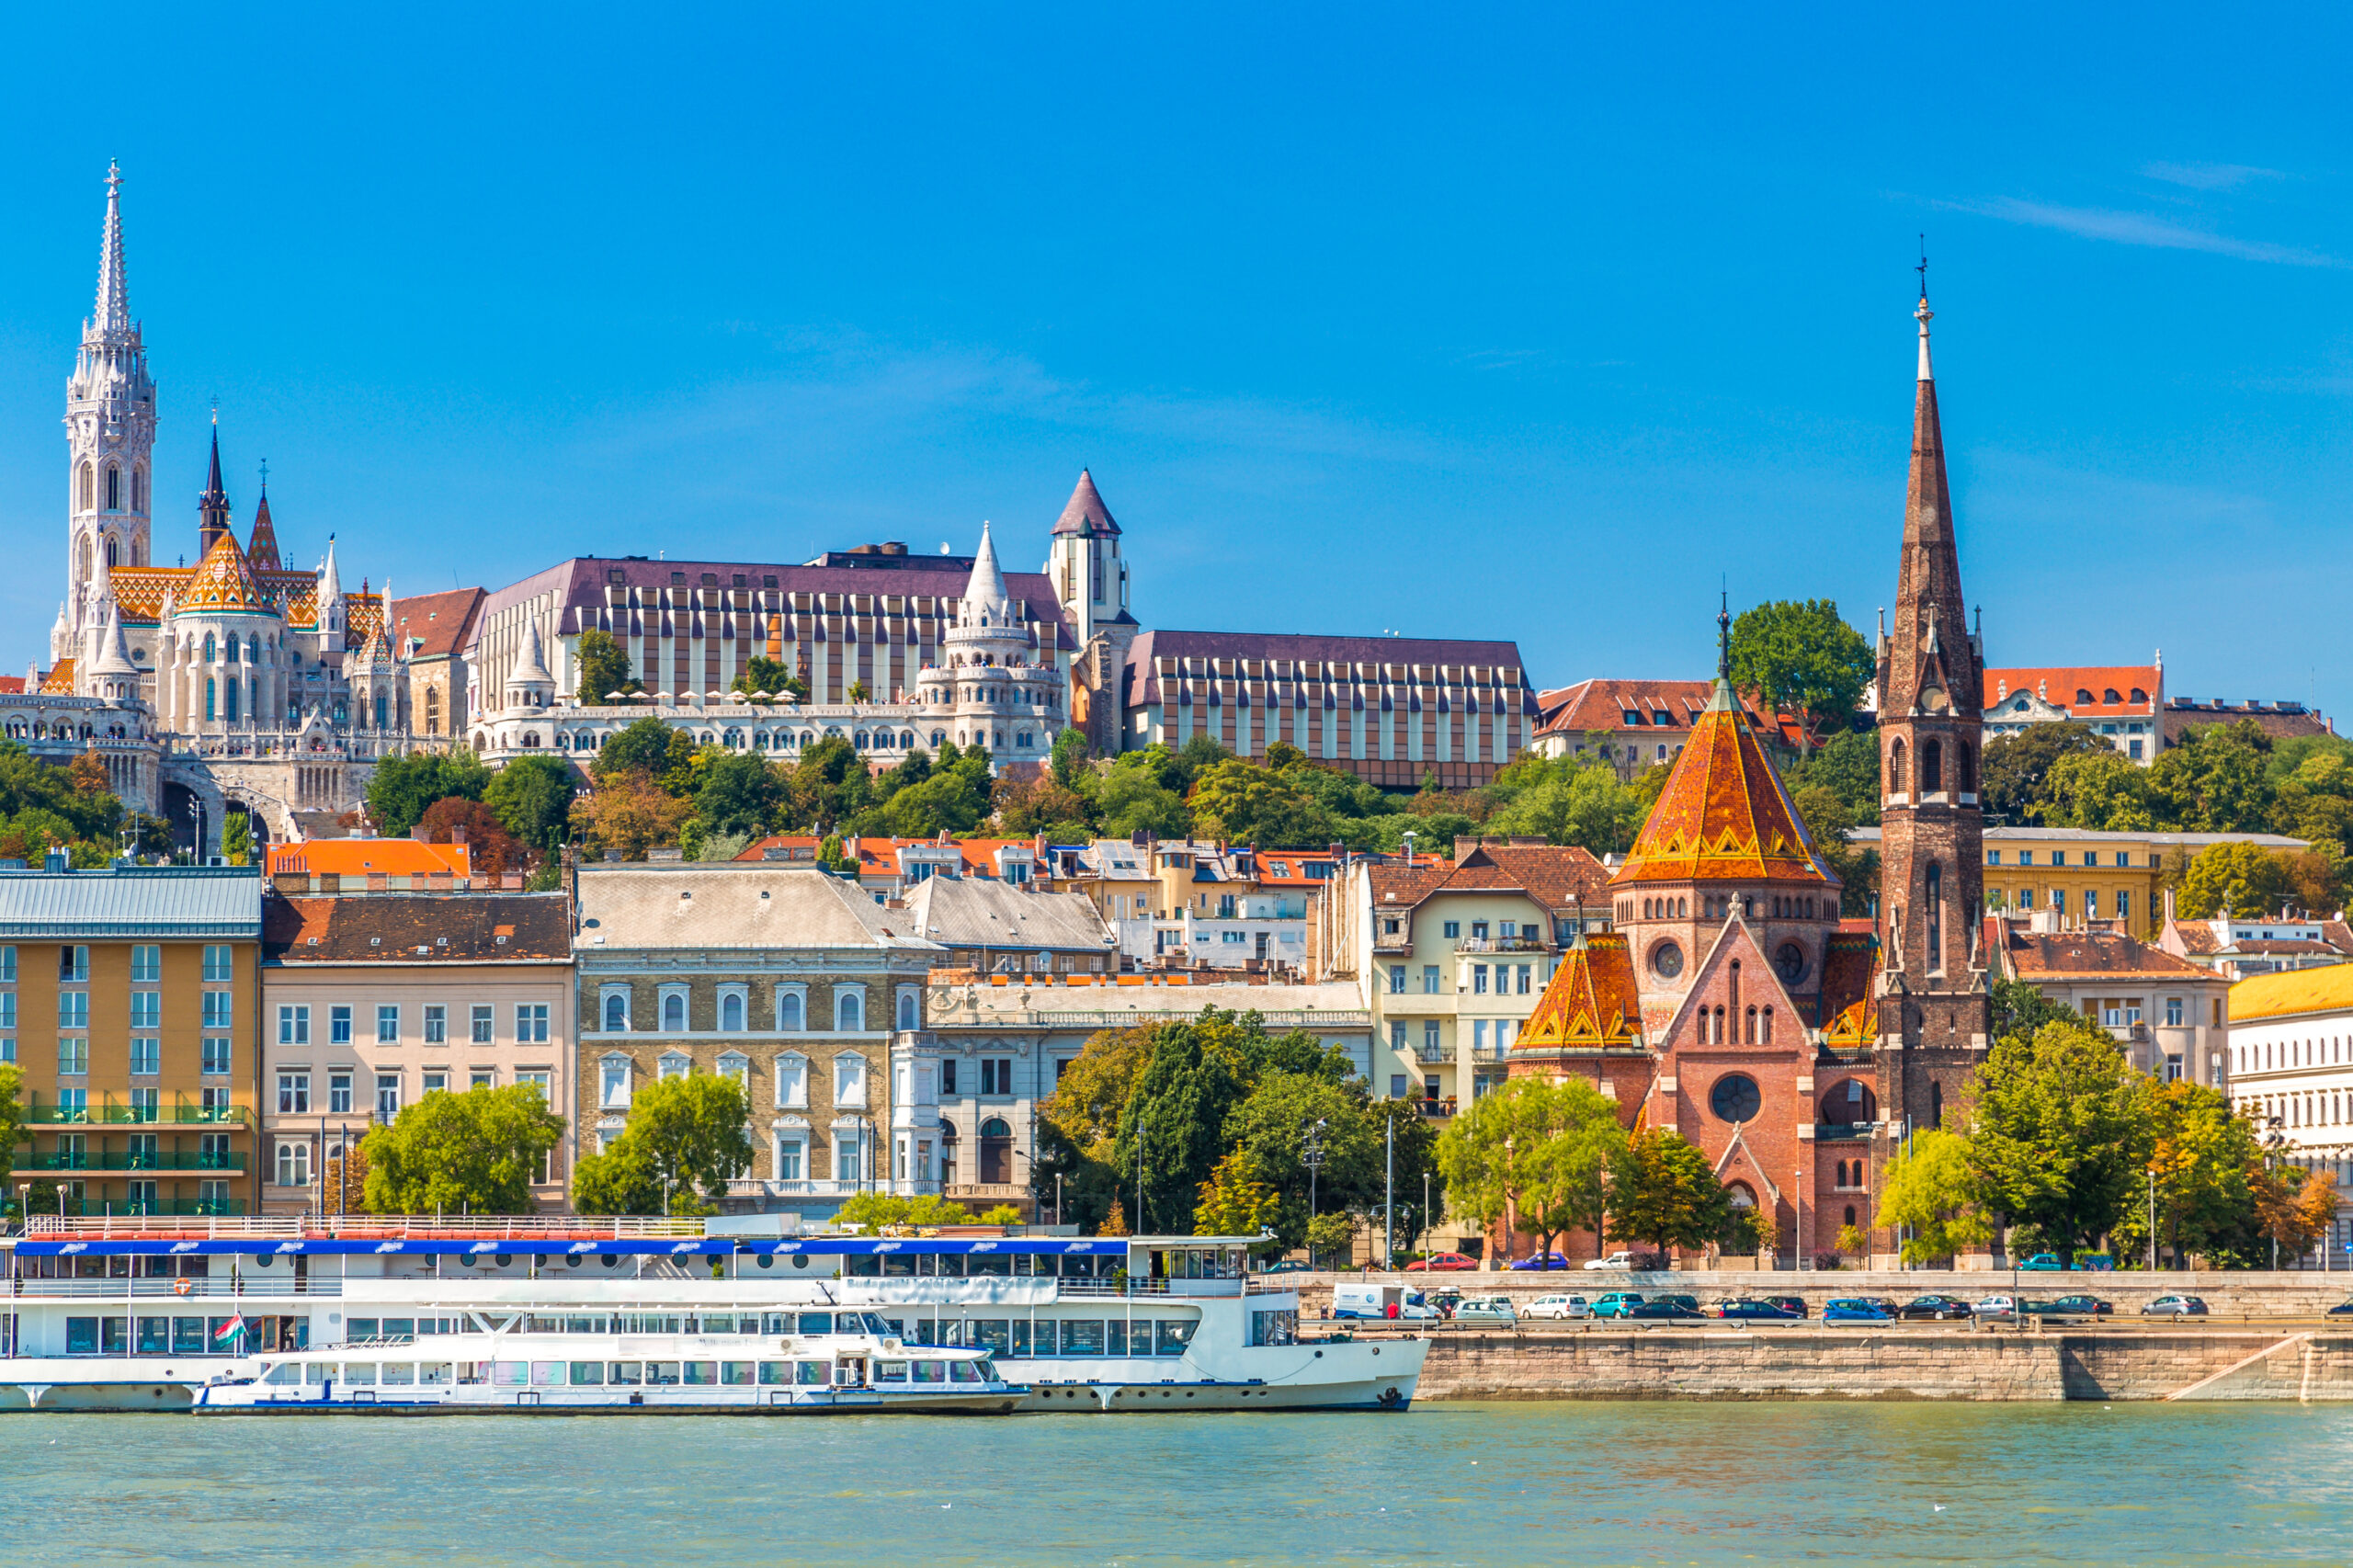 Matthias Church, Bastion of the Fisherman, churches and other monuments and historical buildings of Budapest on the banks of the Danube River.